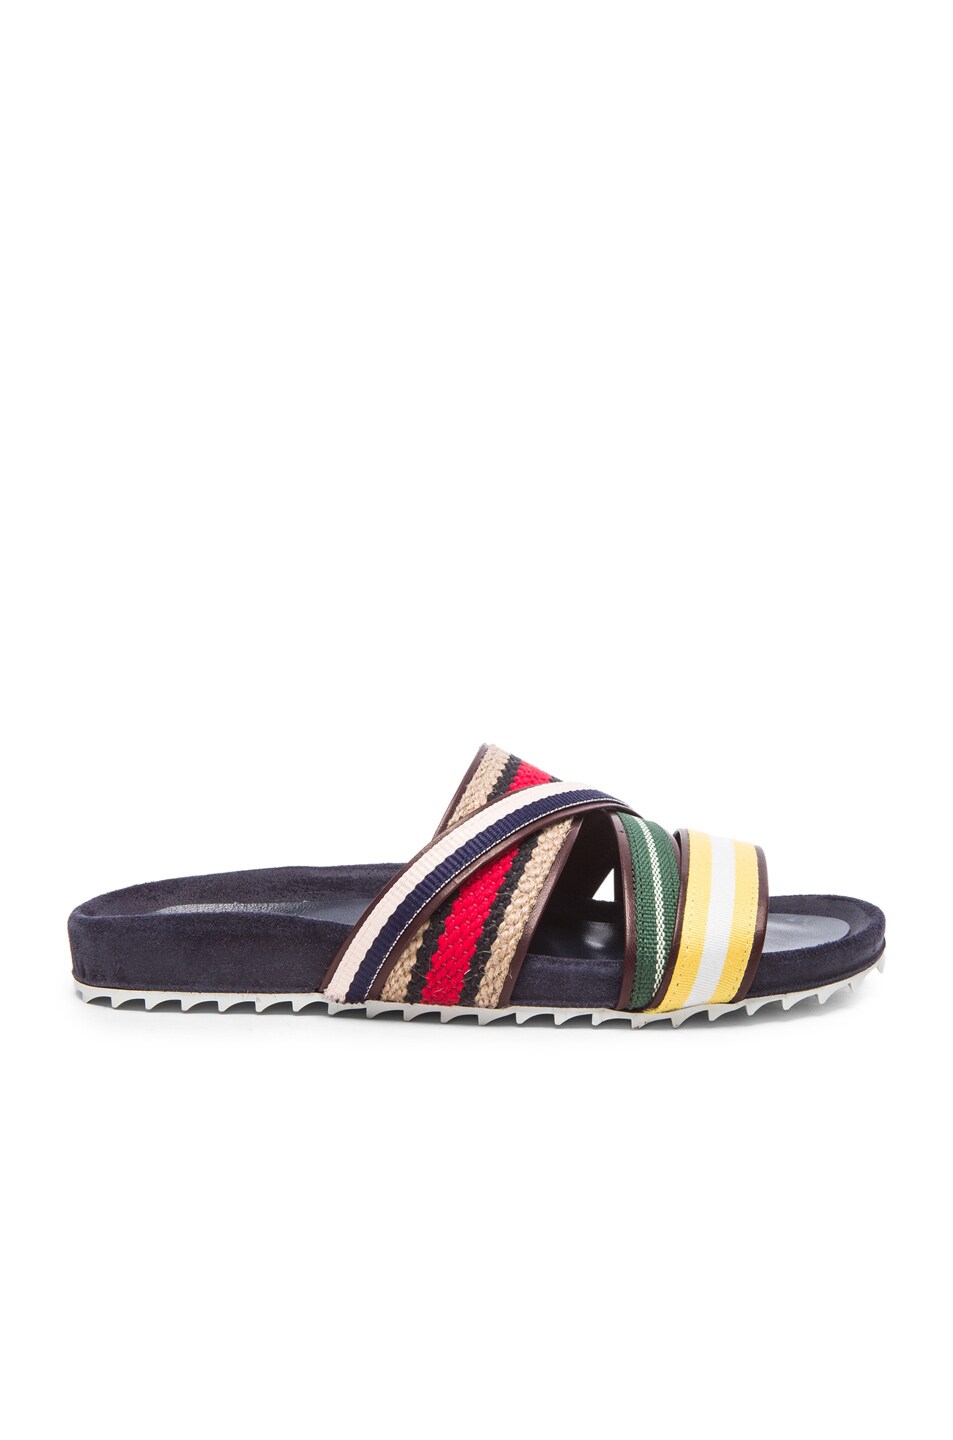 Band of Outsiders Strappy Shower Fabric Slides in Multi | FWRD